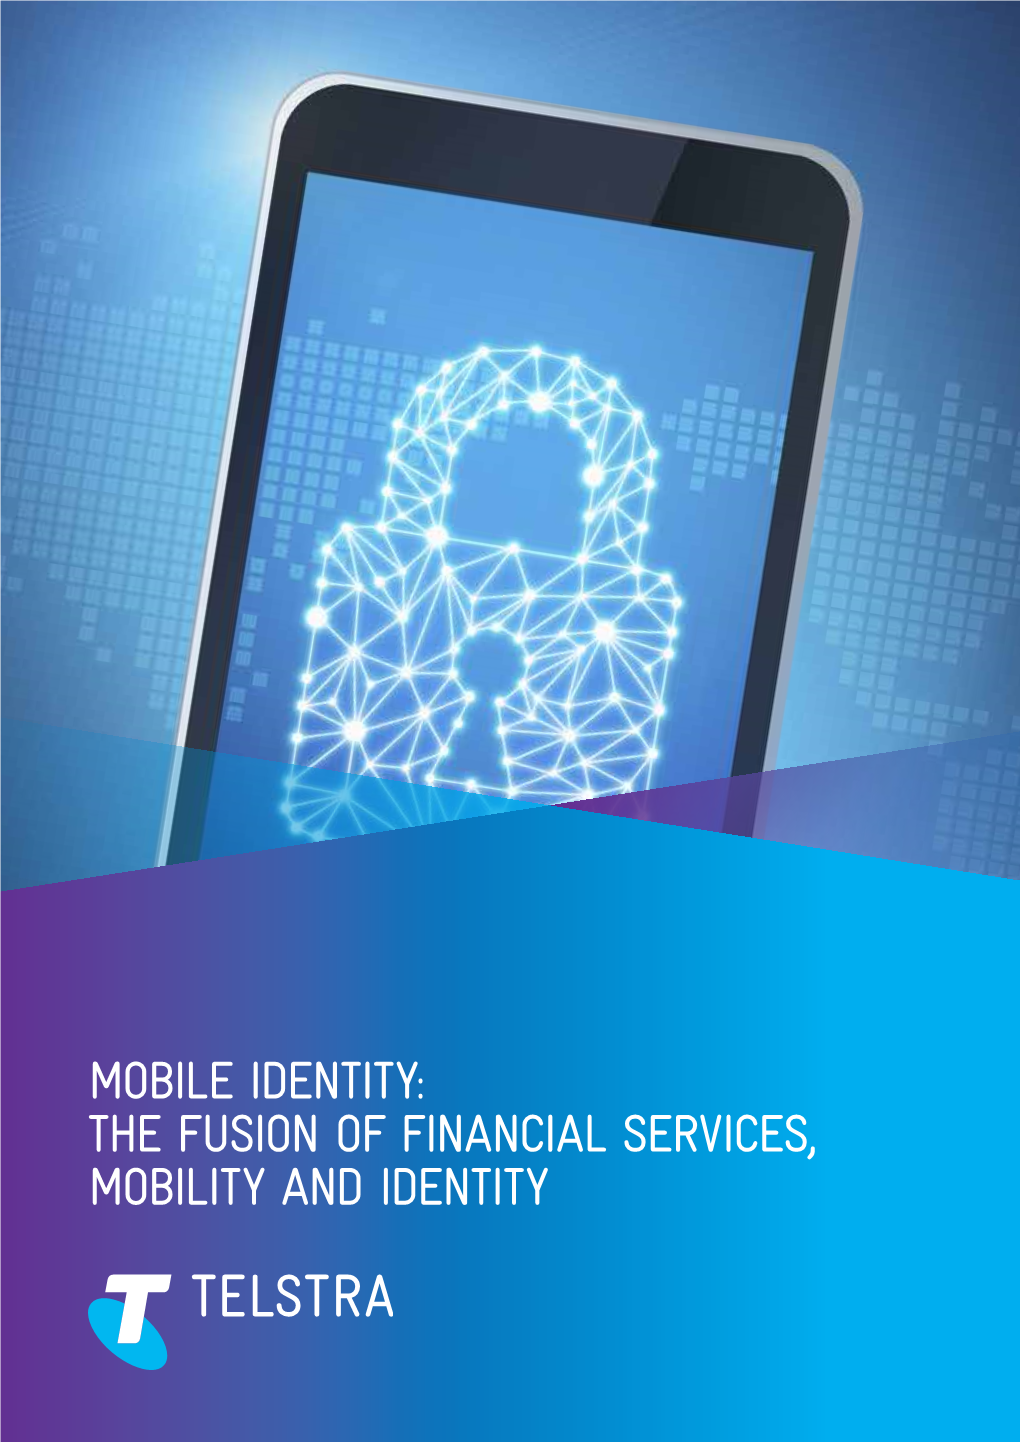 Mobile Identity: the Fusion of Financial Services, Mobility and Identity